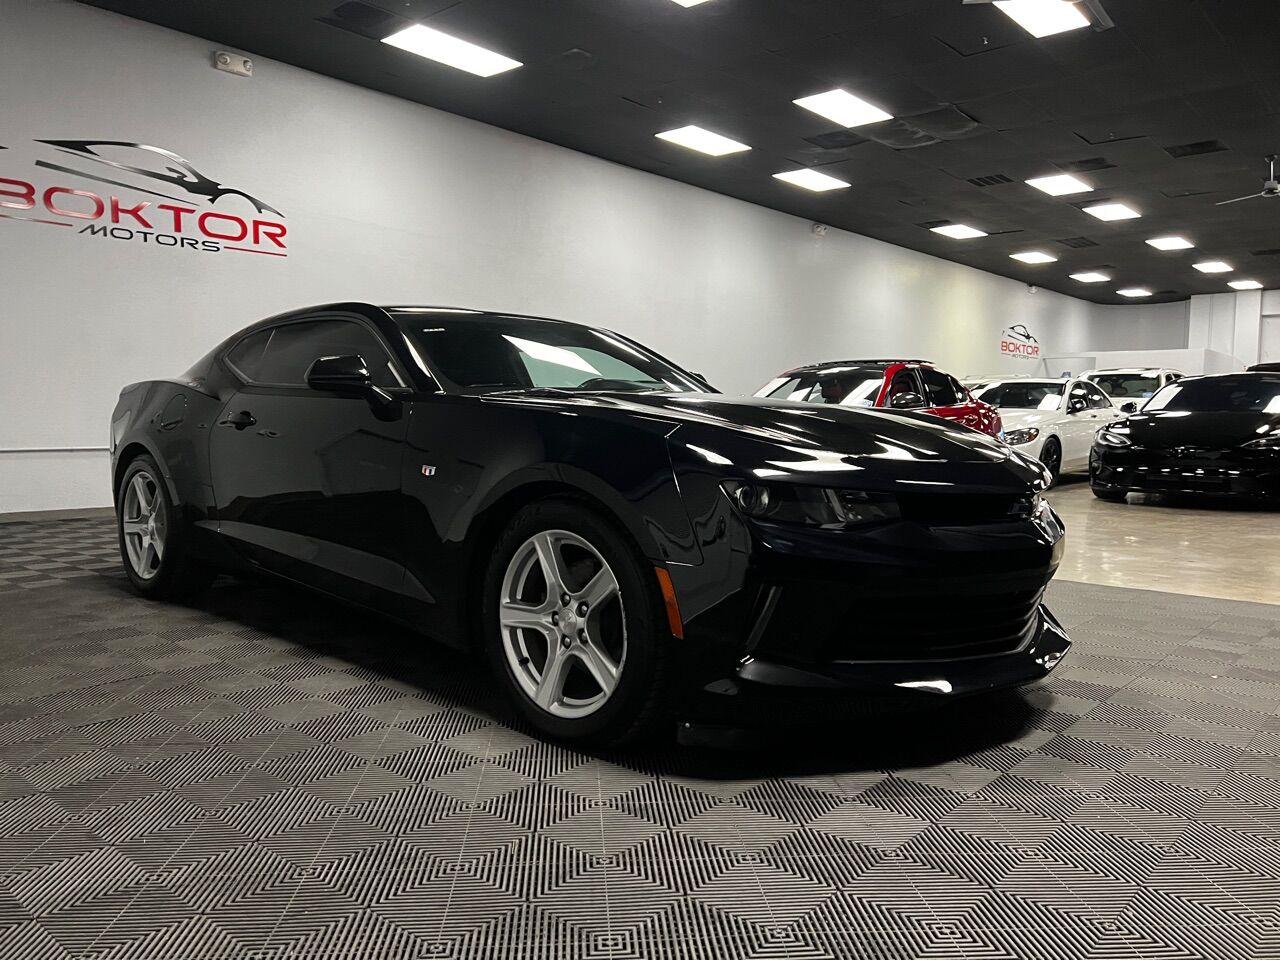 Used 2016 Chevrolet Camaro LT 2dr Coupe w/1LT For Sale (Sold 